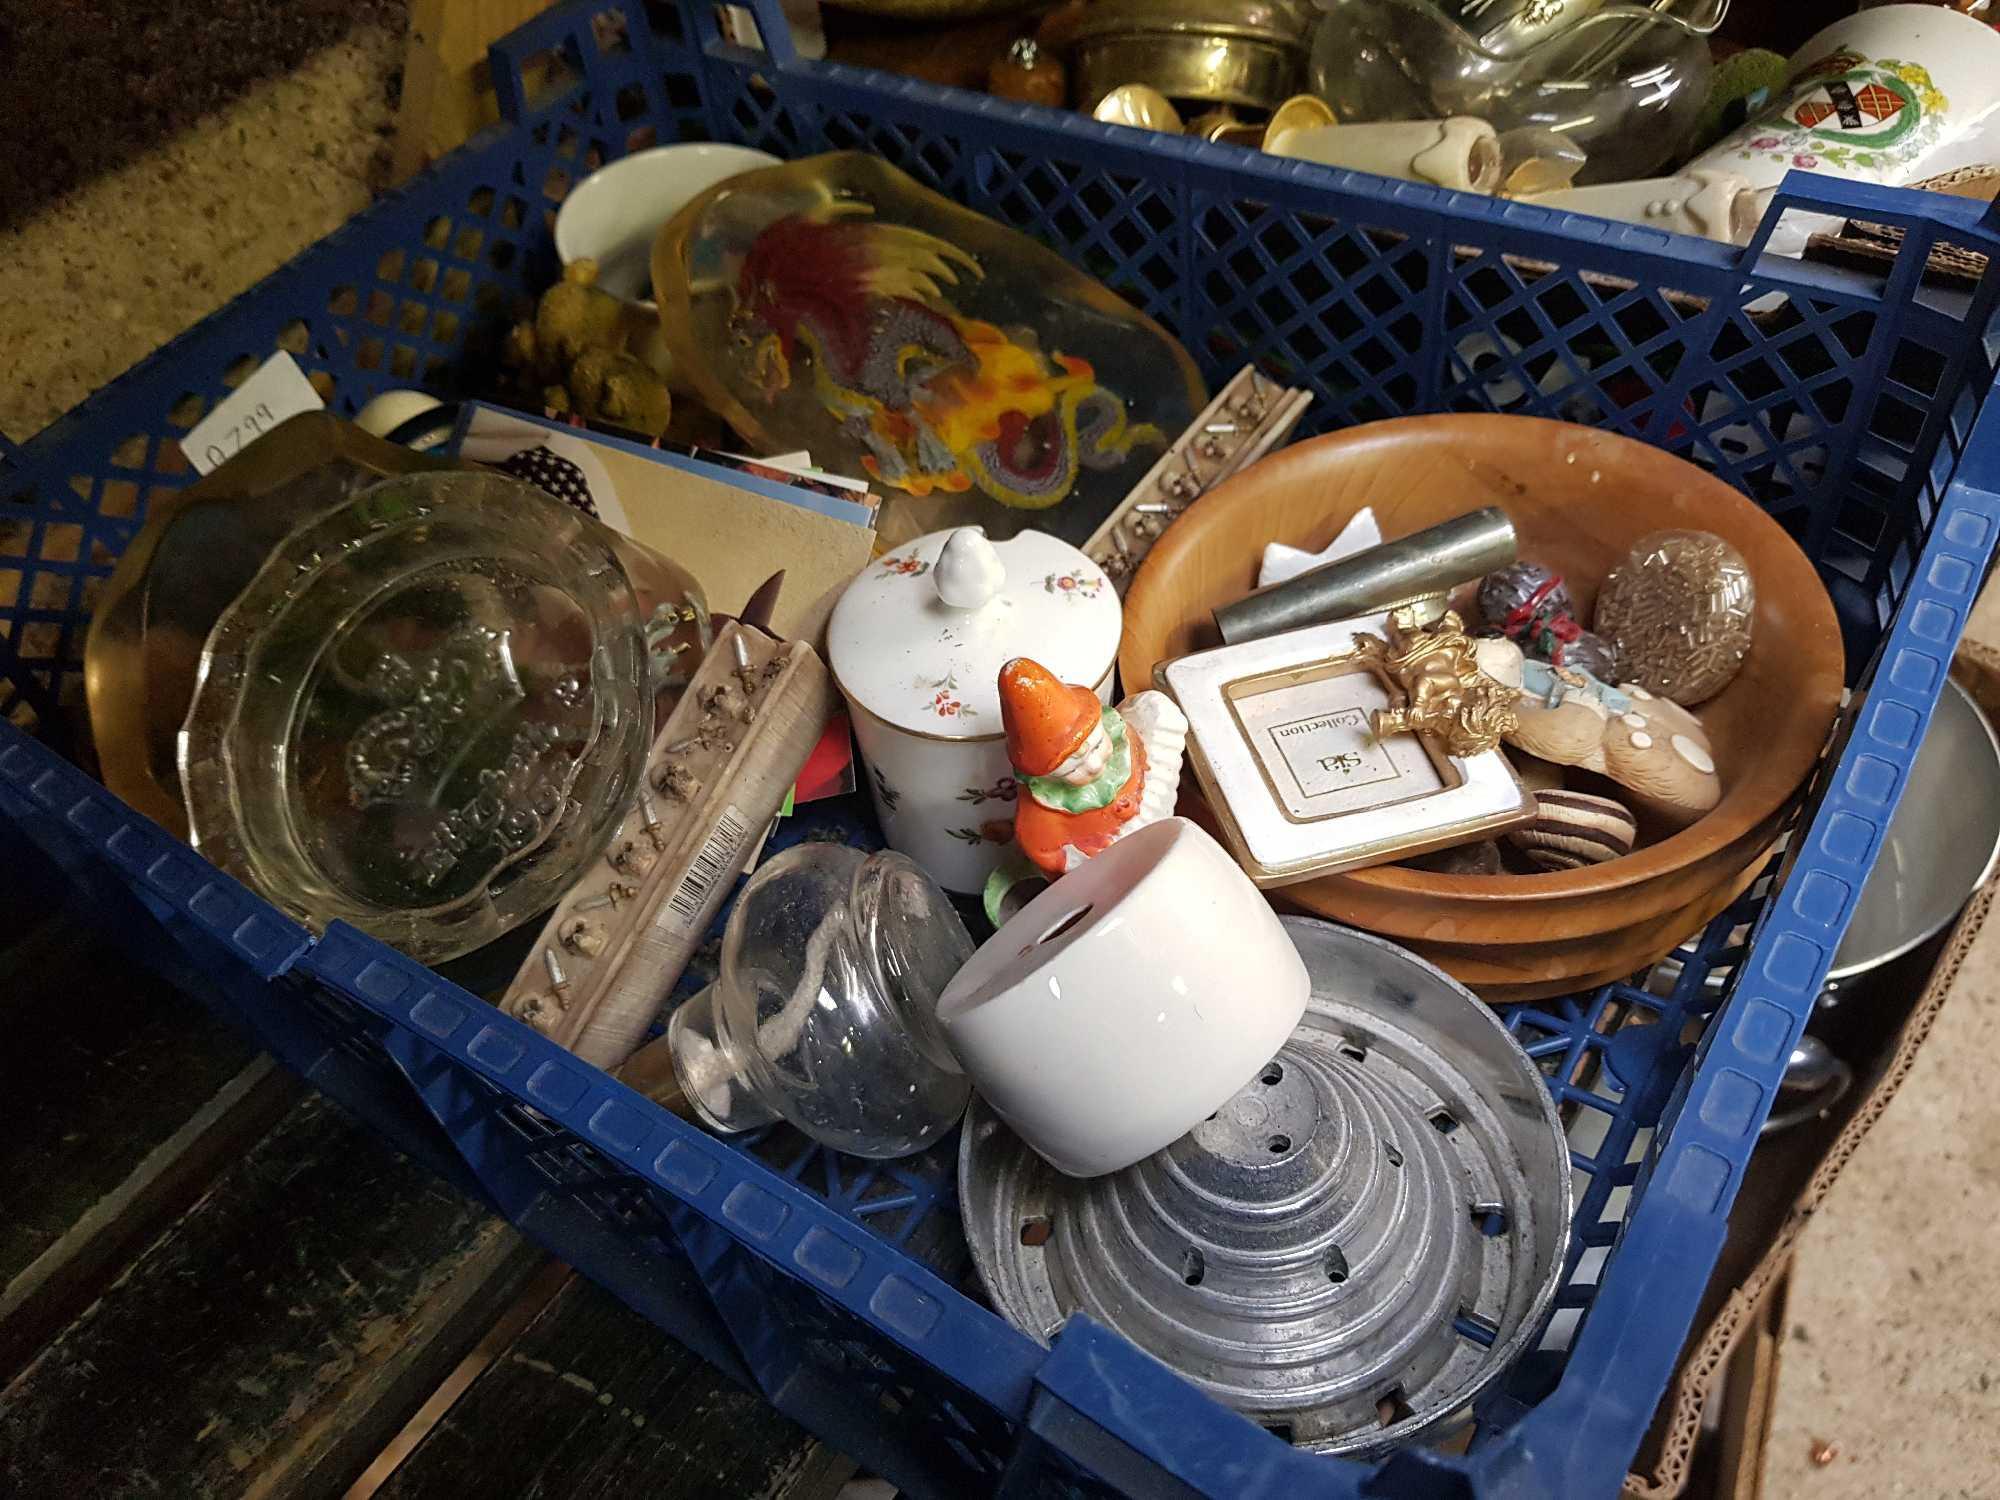 2 CARTONS OF MISC BRIC-A-BRAC INCL; ASHTRAYS, DISHES, BROWNIE BOX CAMERA ETC - Image 2 of 3